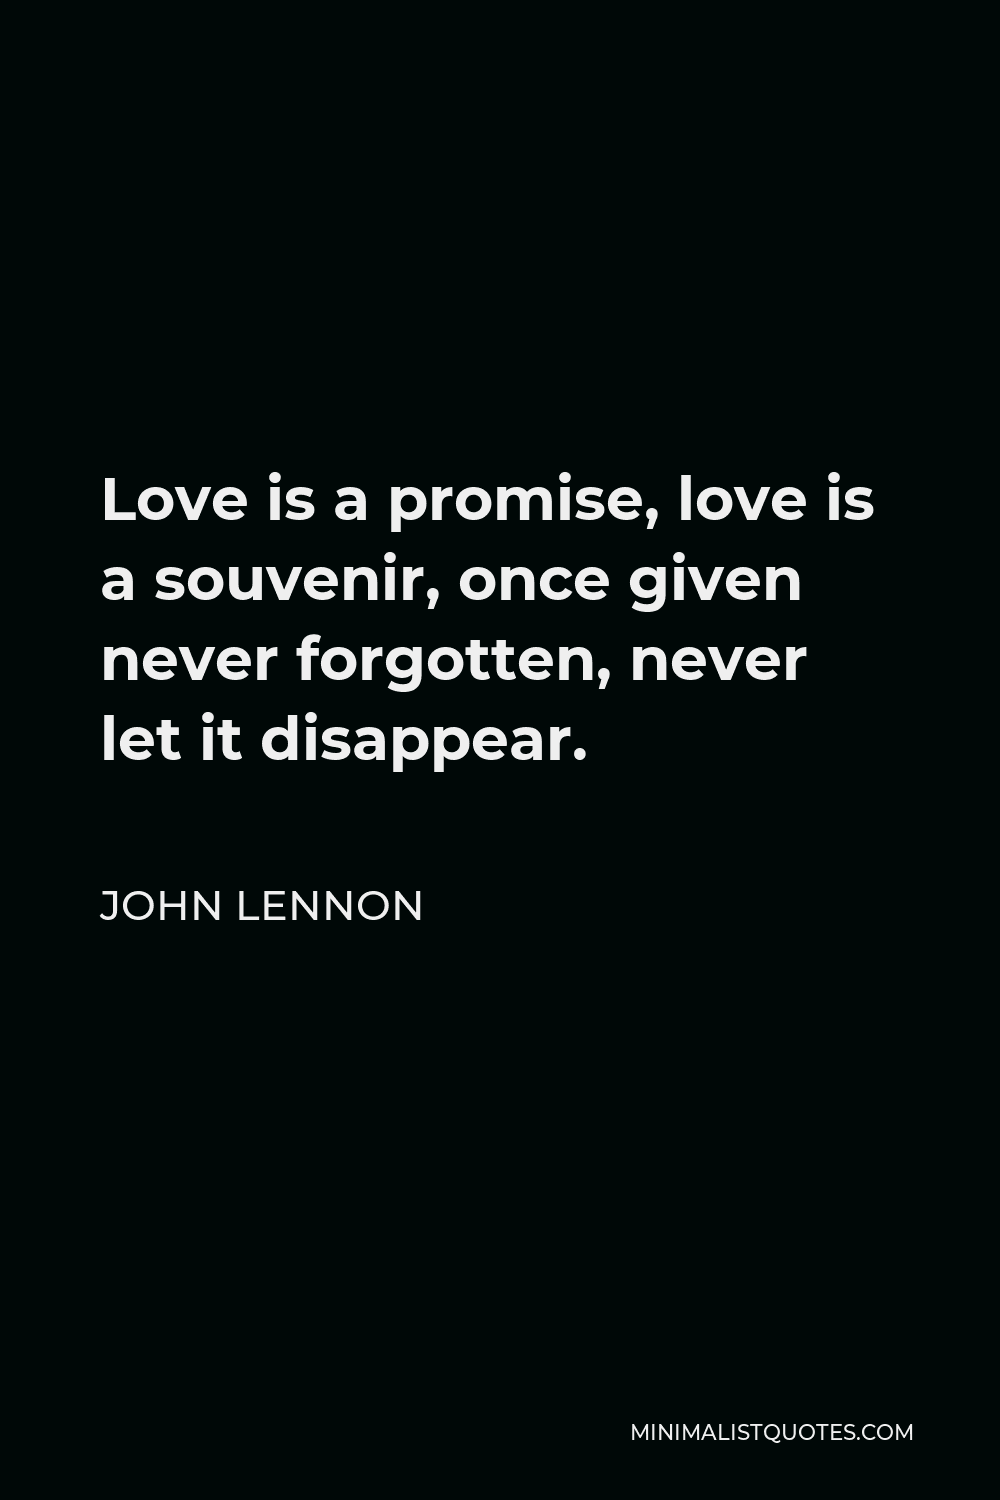 John Lennon Quote - Love is a promise, love is a souvenir, once given never forgotten, never let it disappear.